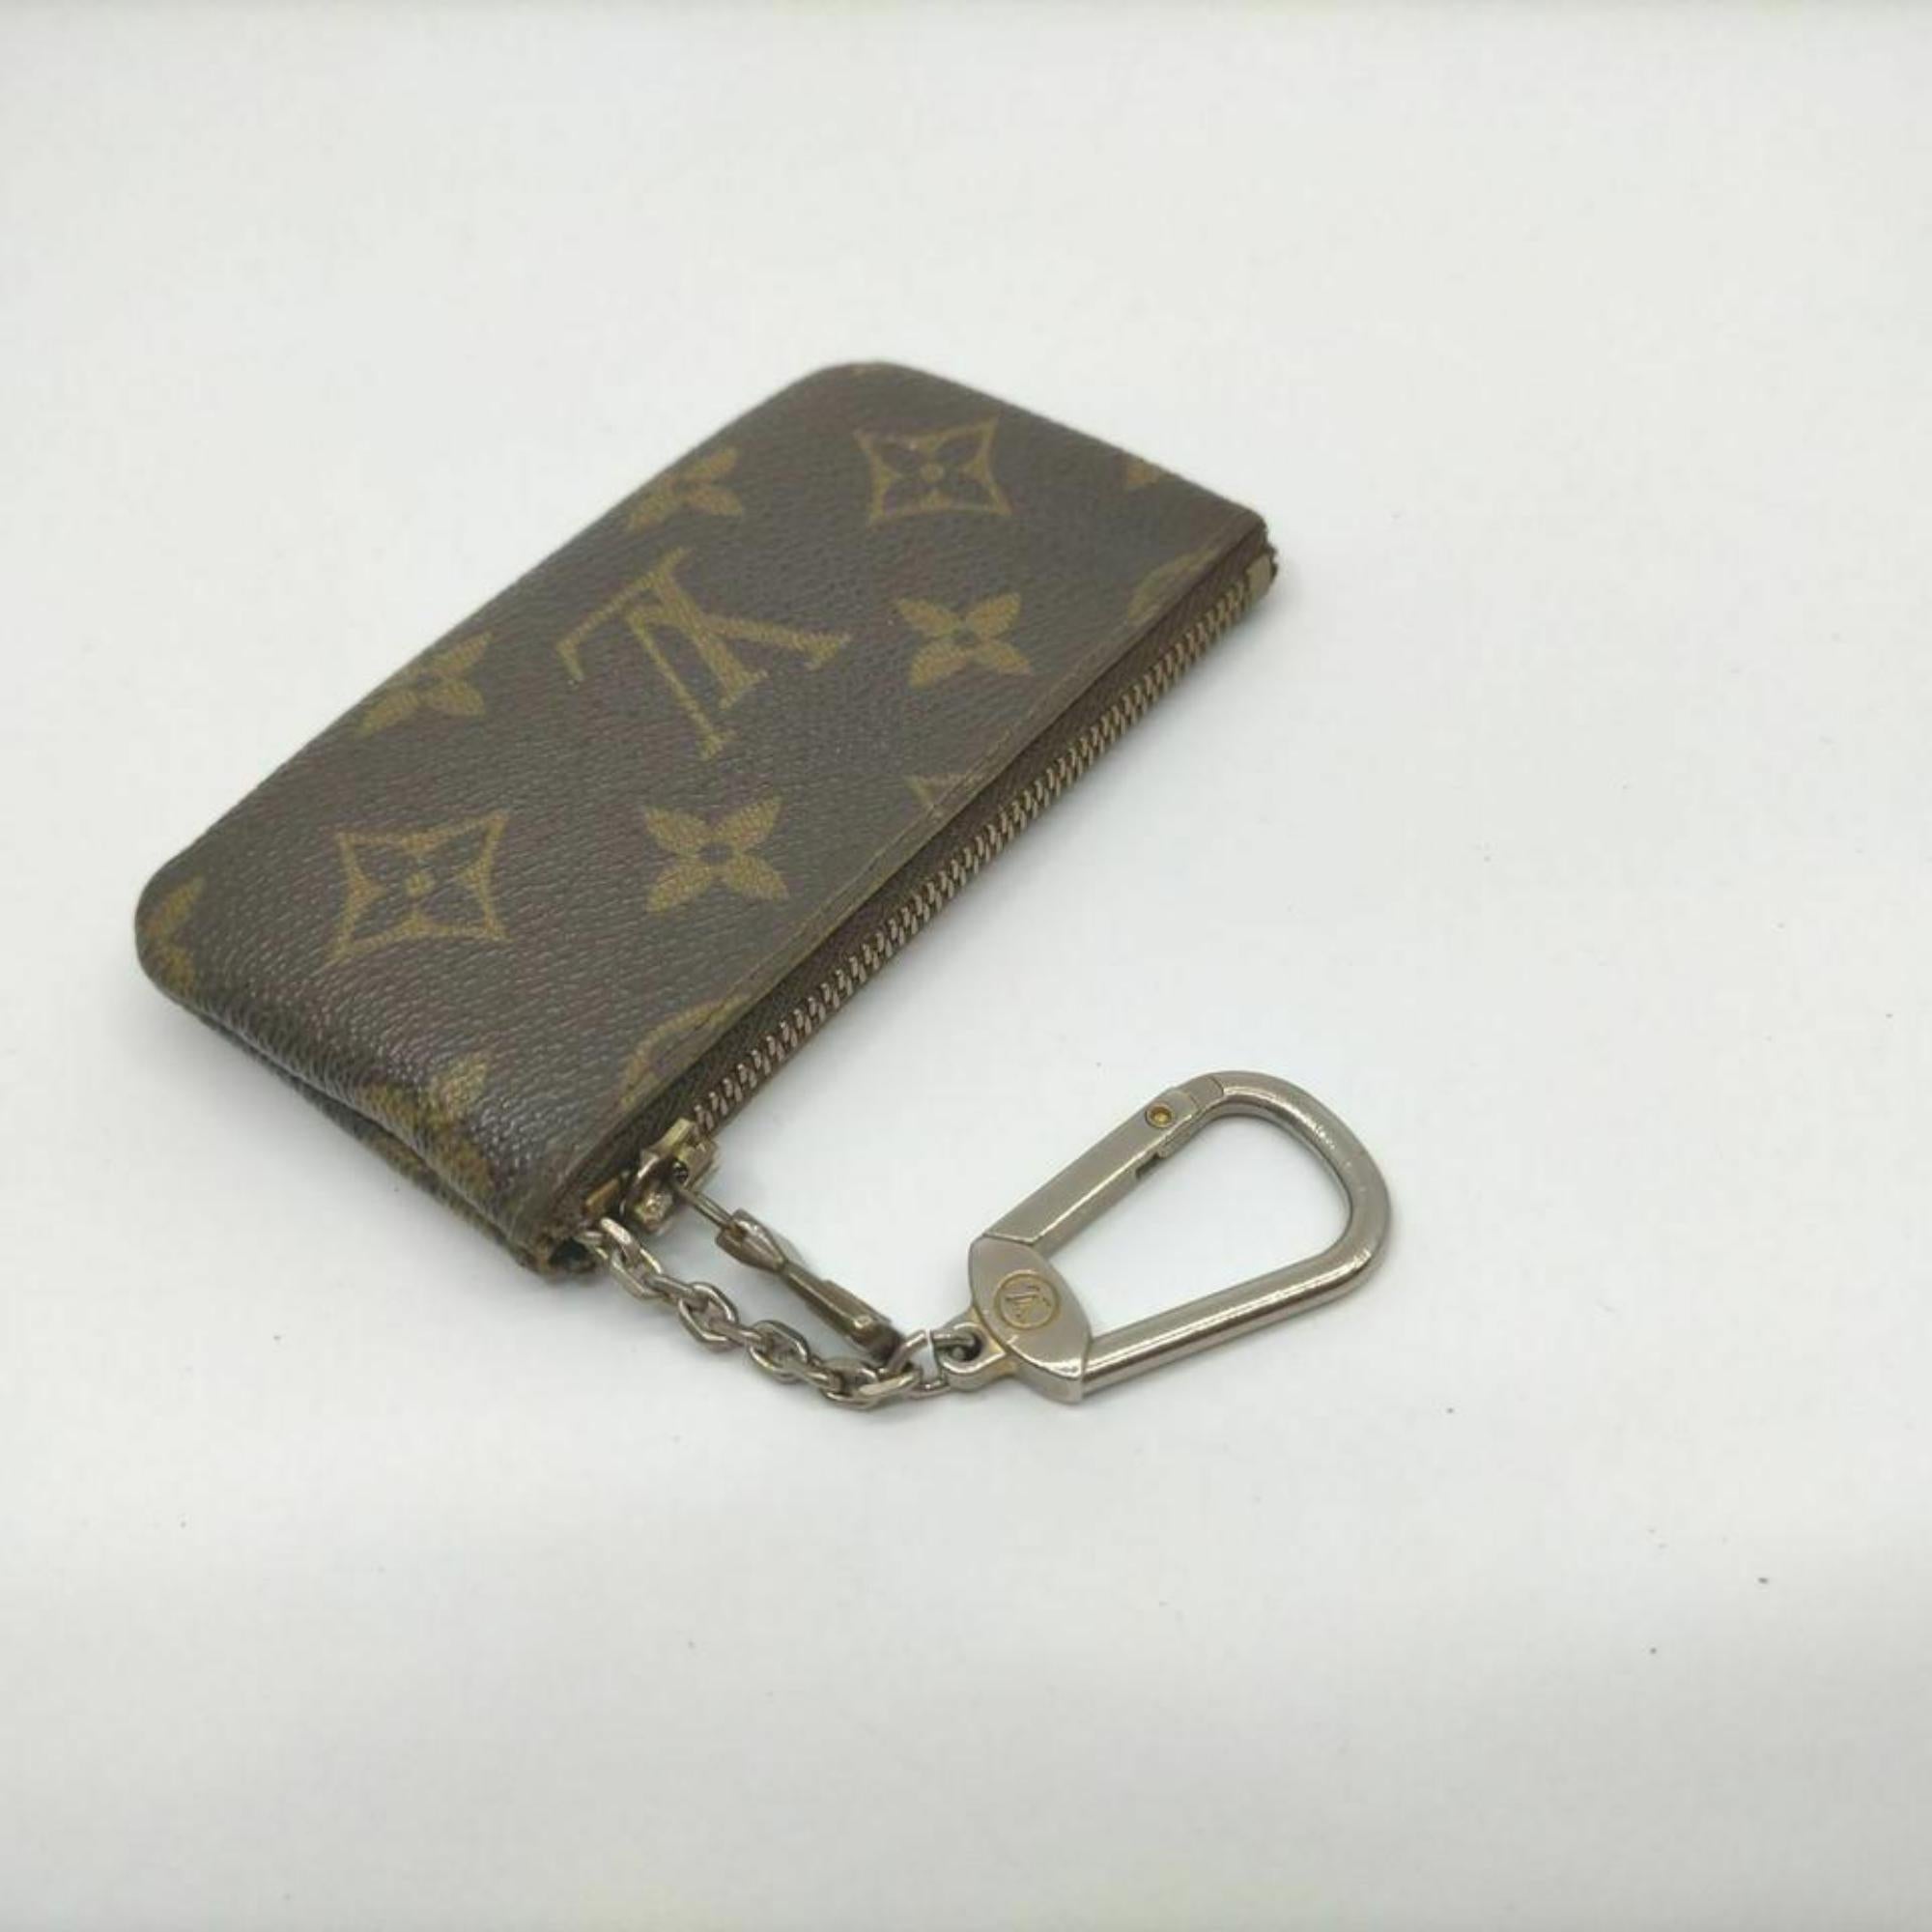 Louis Vuitton Coin Purse Keychain - 2 For Sale on 1stDibs